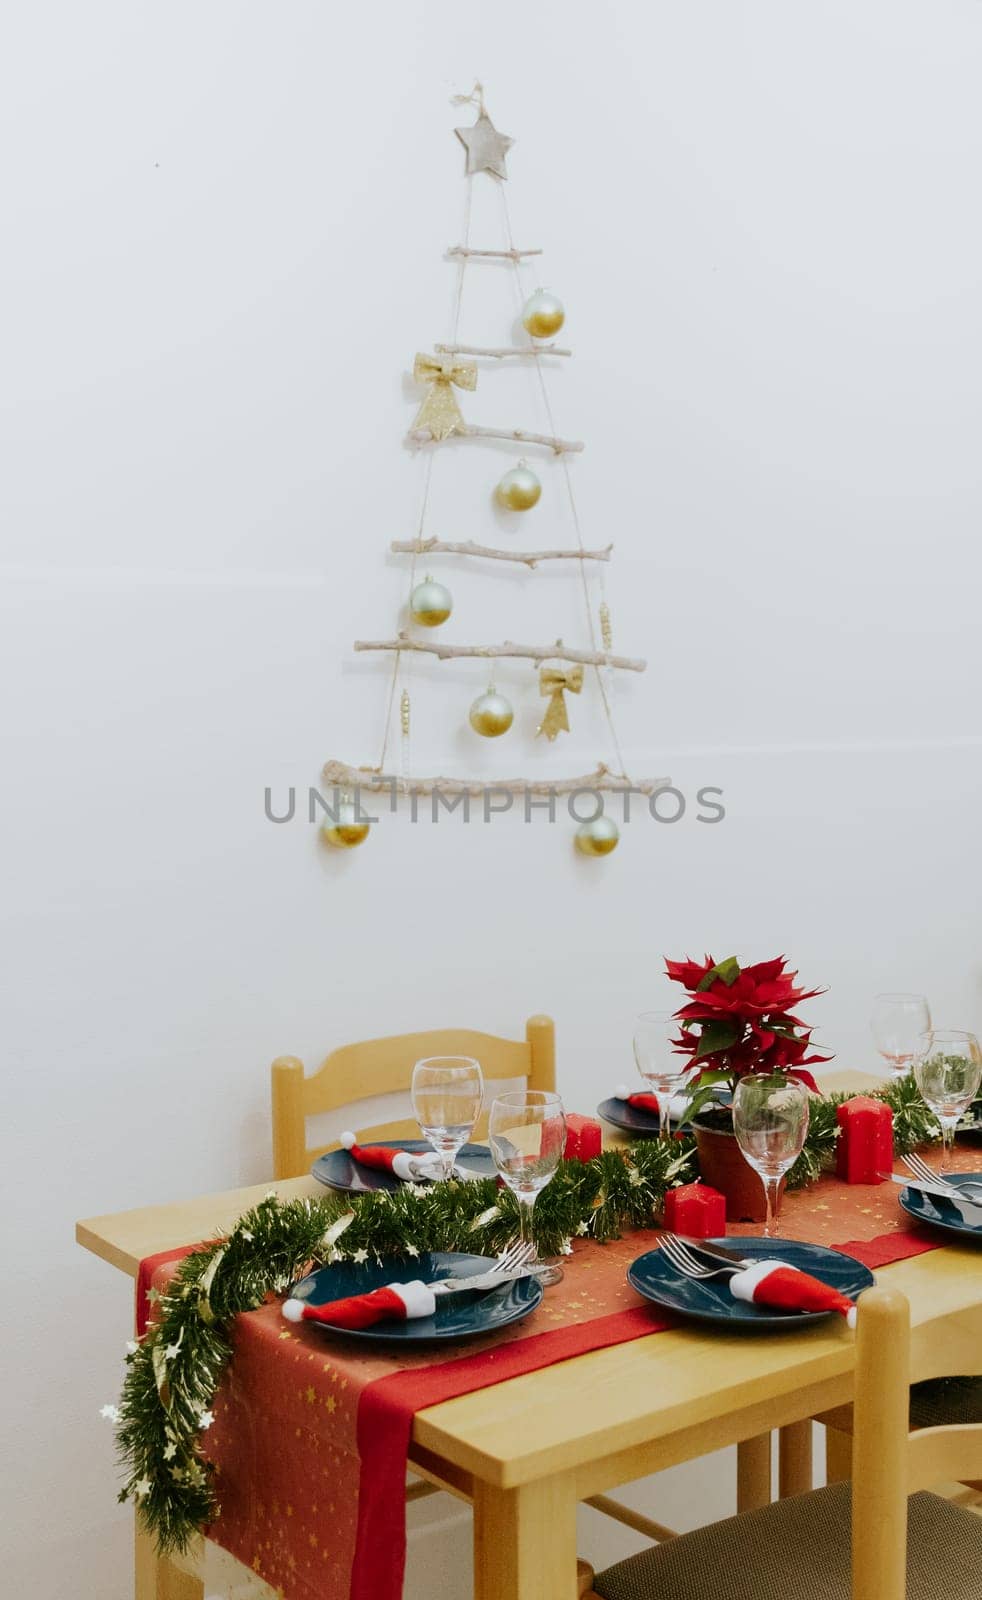 A beautifully served Christmas table with a red tablecloth and a wall-mounted tree made of sticks and branches on a winter evening in the kitchen, close-up side view.